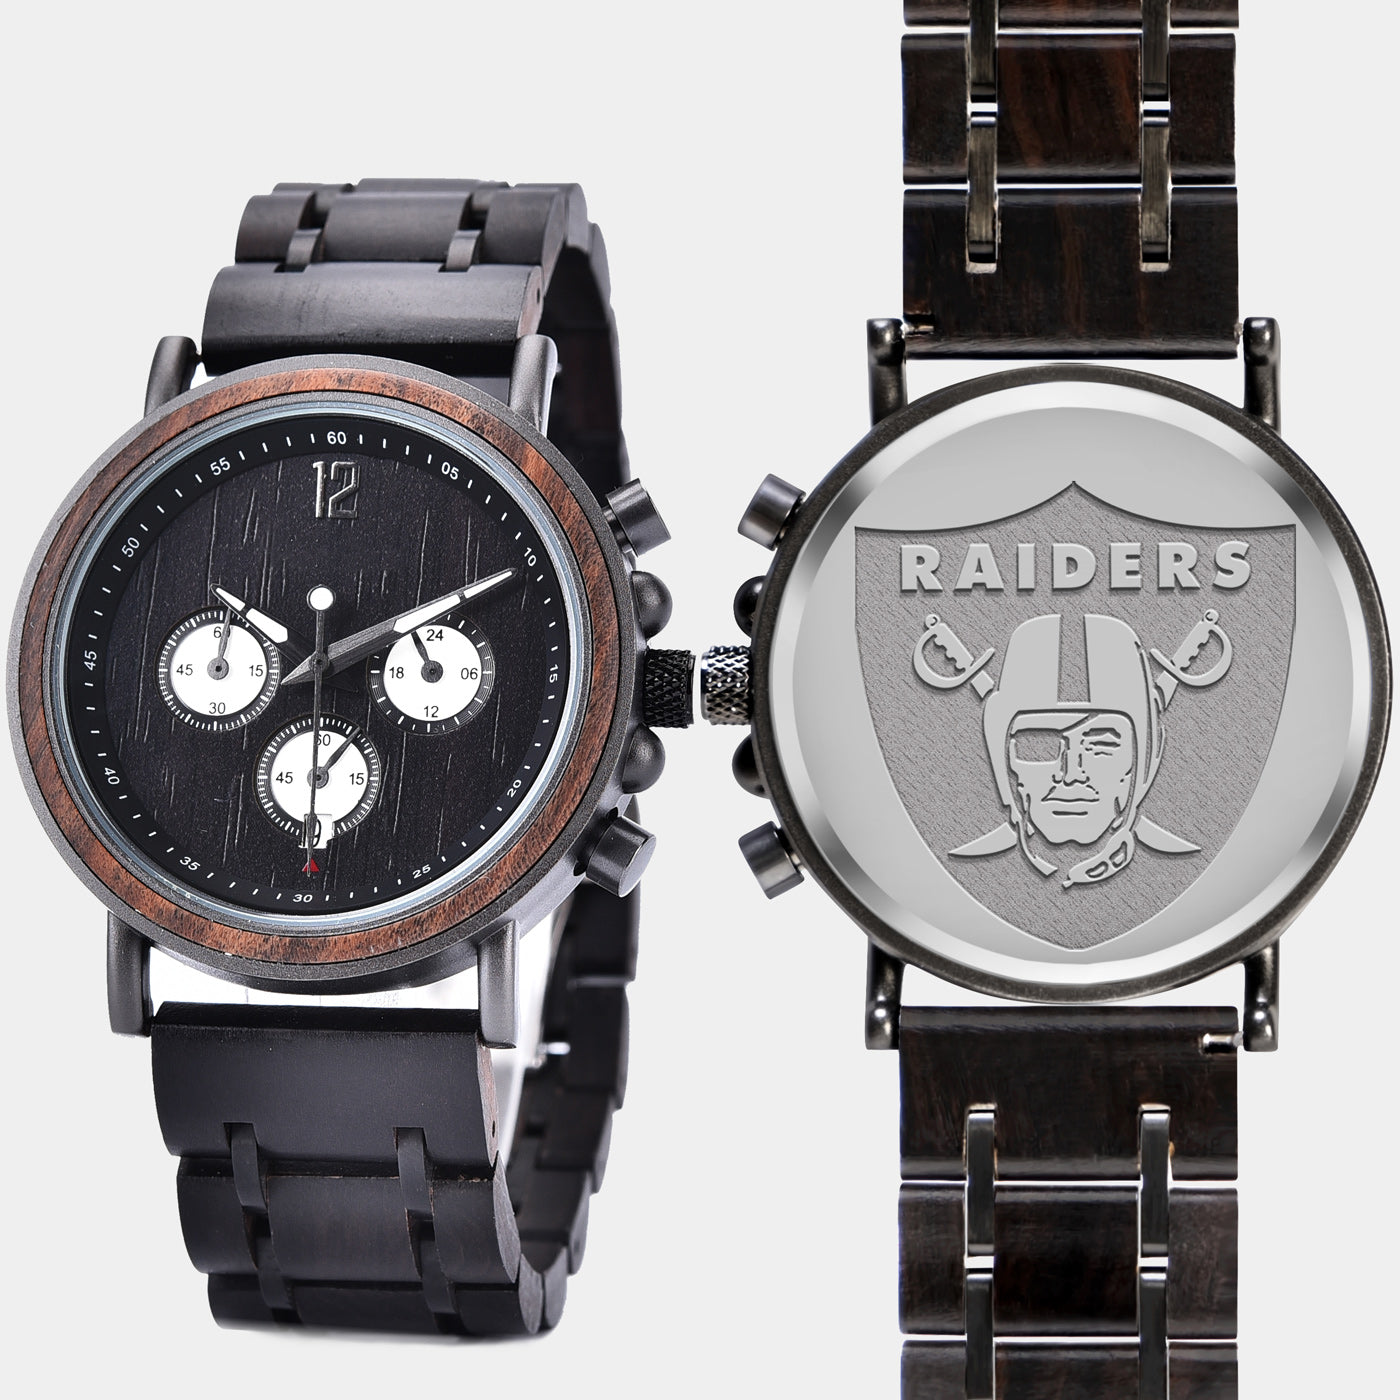 Las Vegas Raiders Chronograph Wood Watch - Raiders Gifts for Men - Raiders Gifts for Dad - Personalized Raiders Gifts - Raiders Gifts for Him